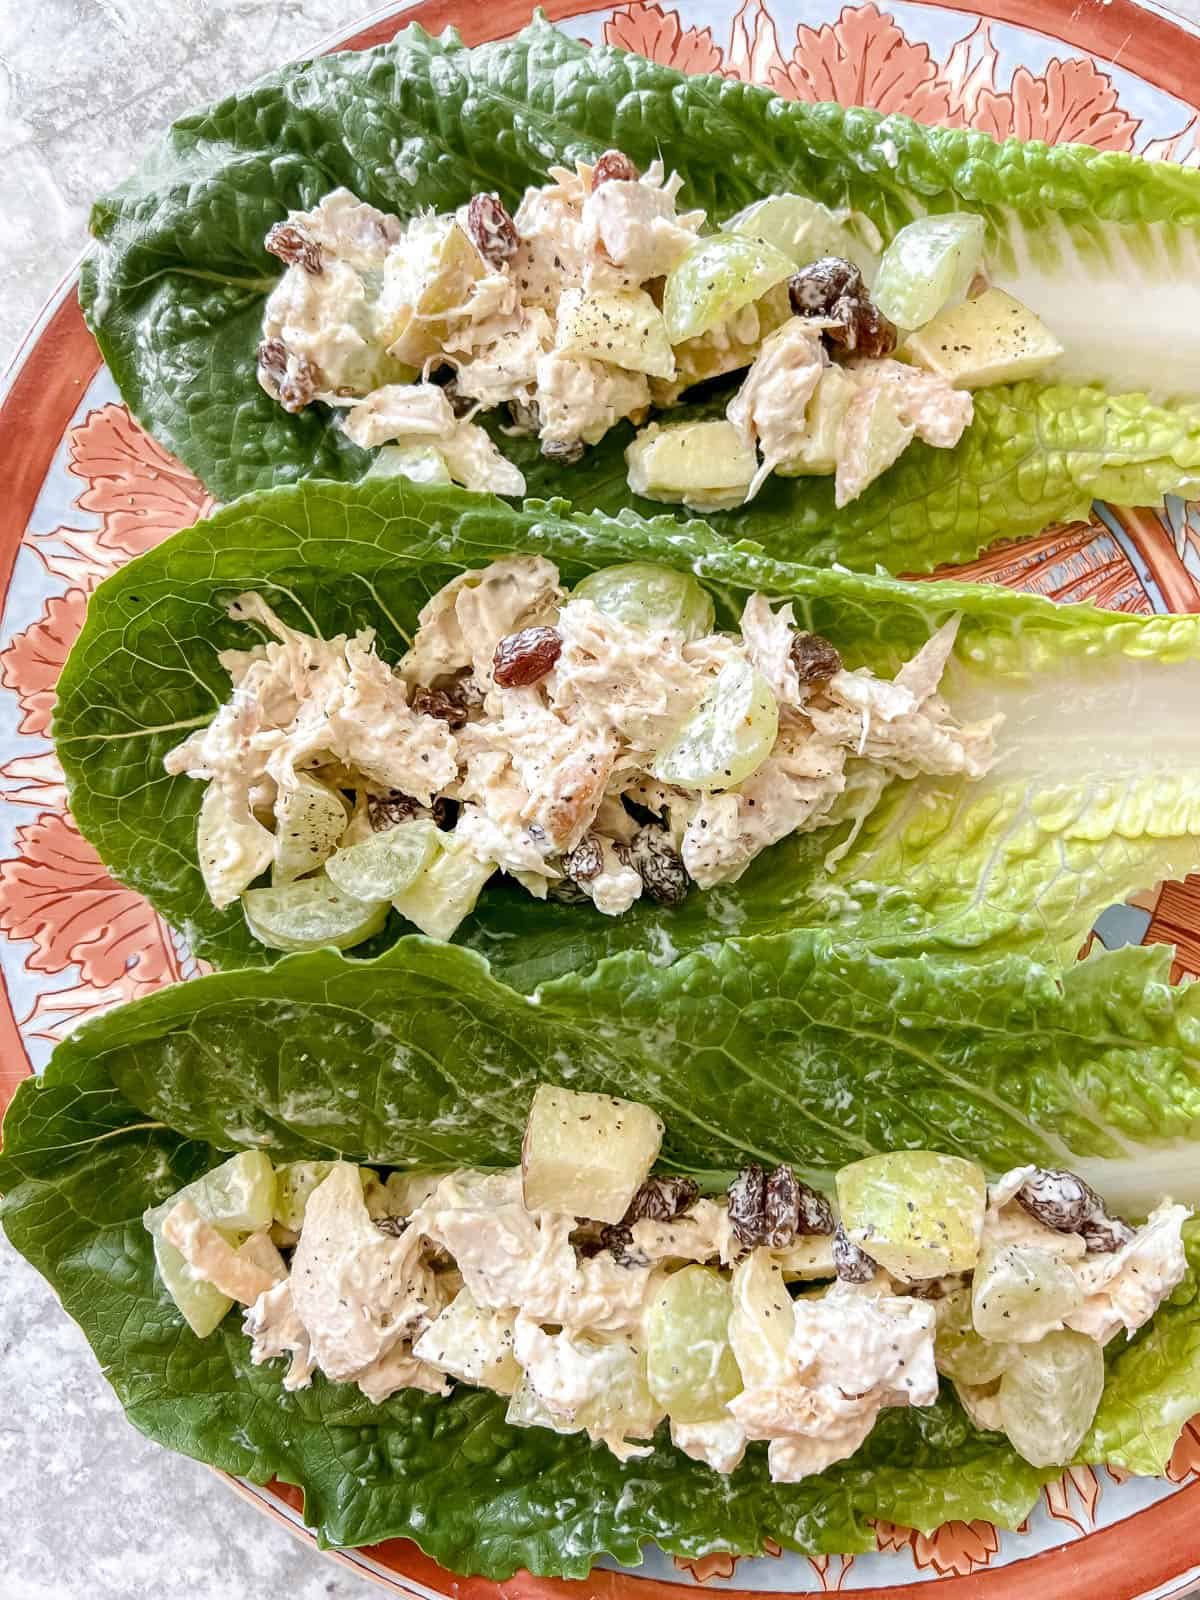 Rotisserie chicken salad on lettuce wraps on a plate.